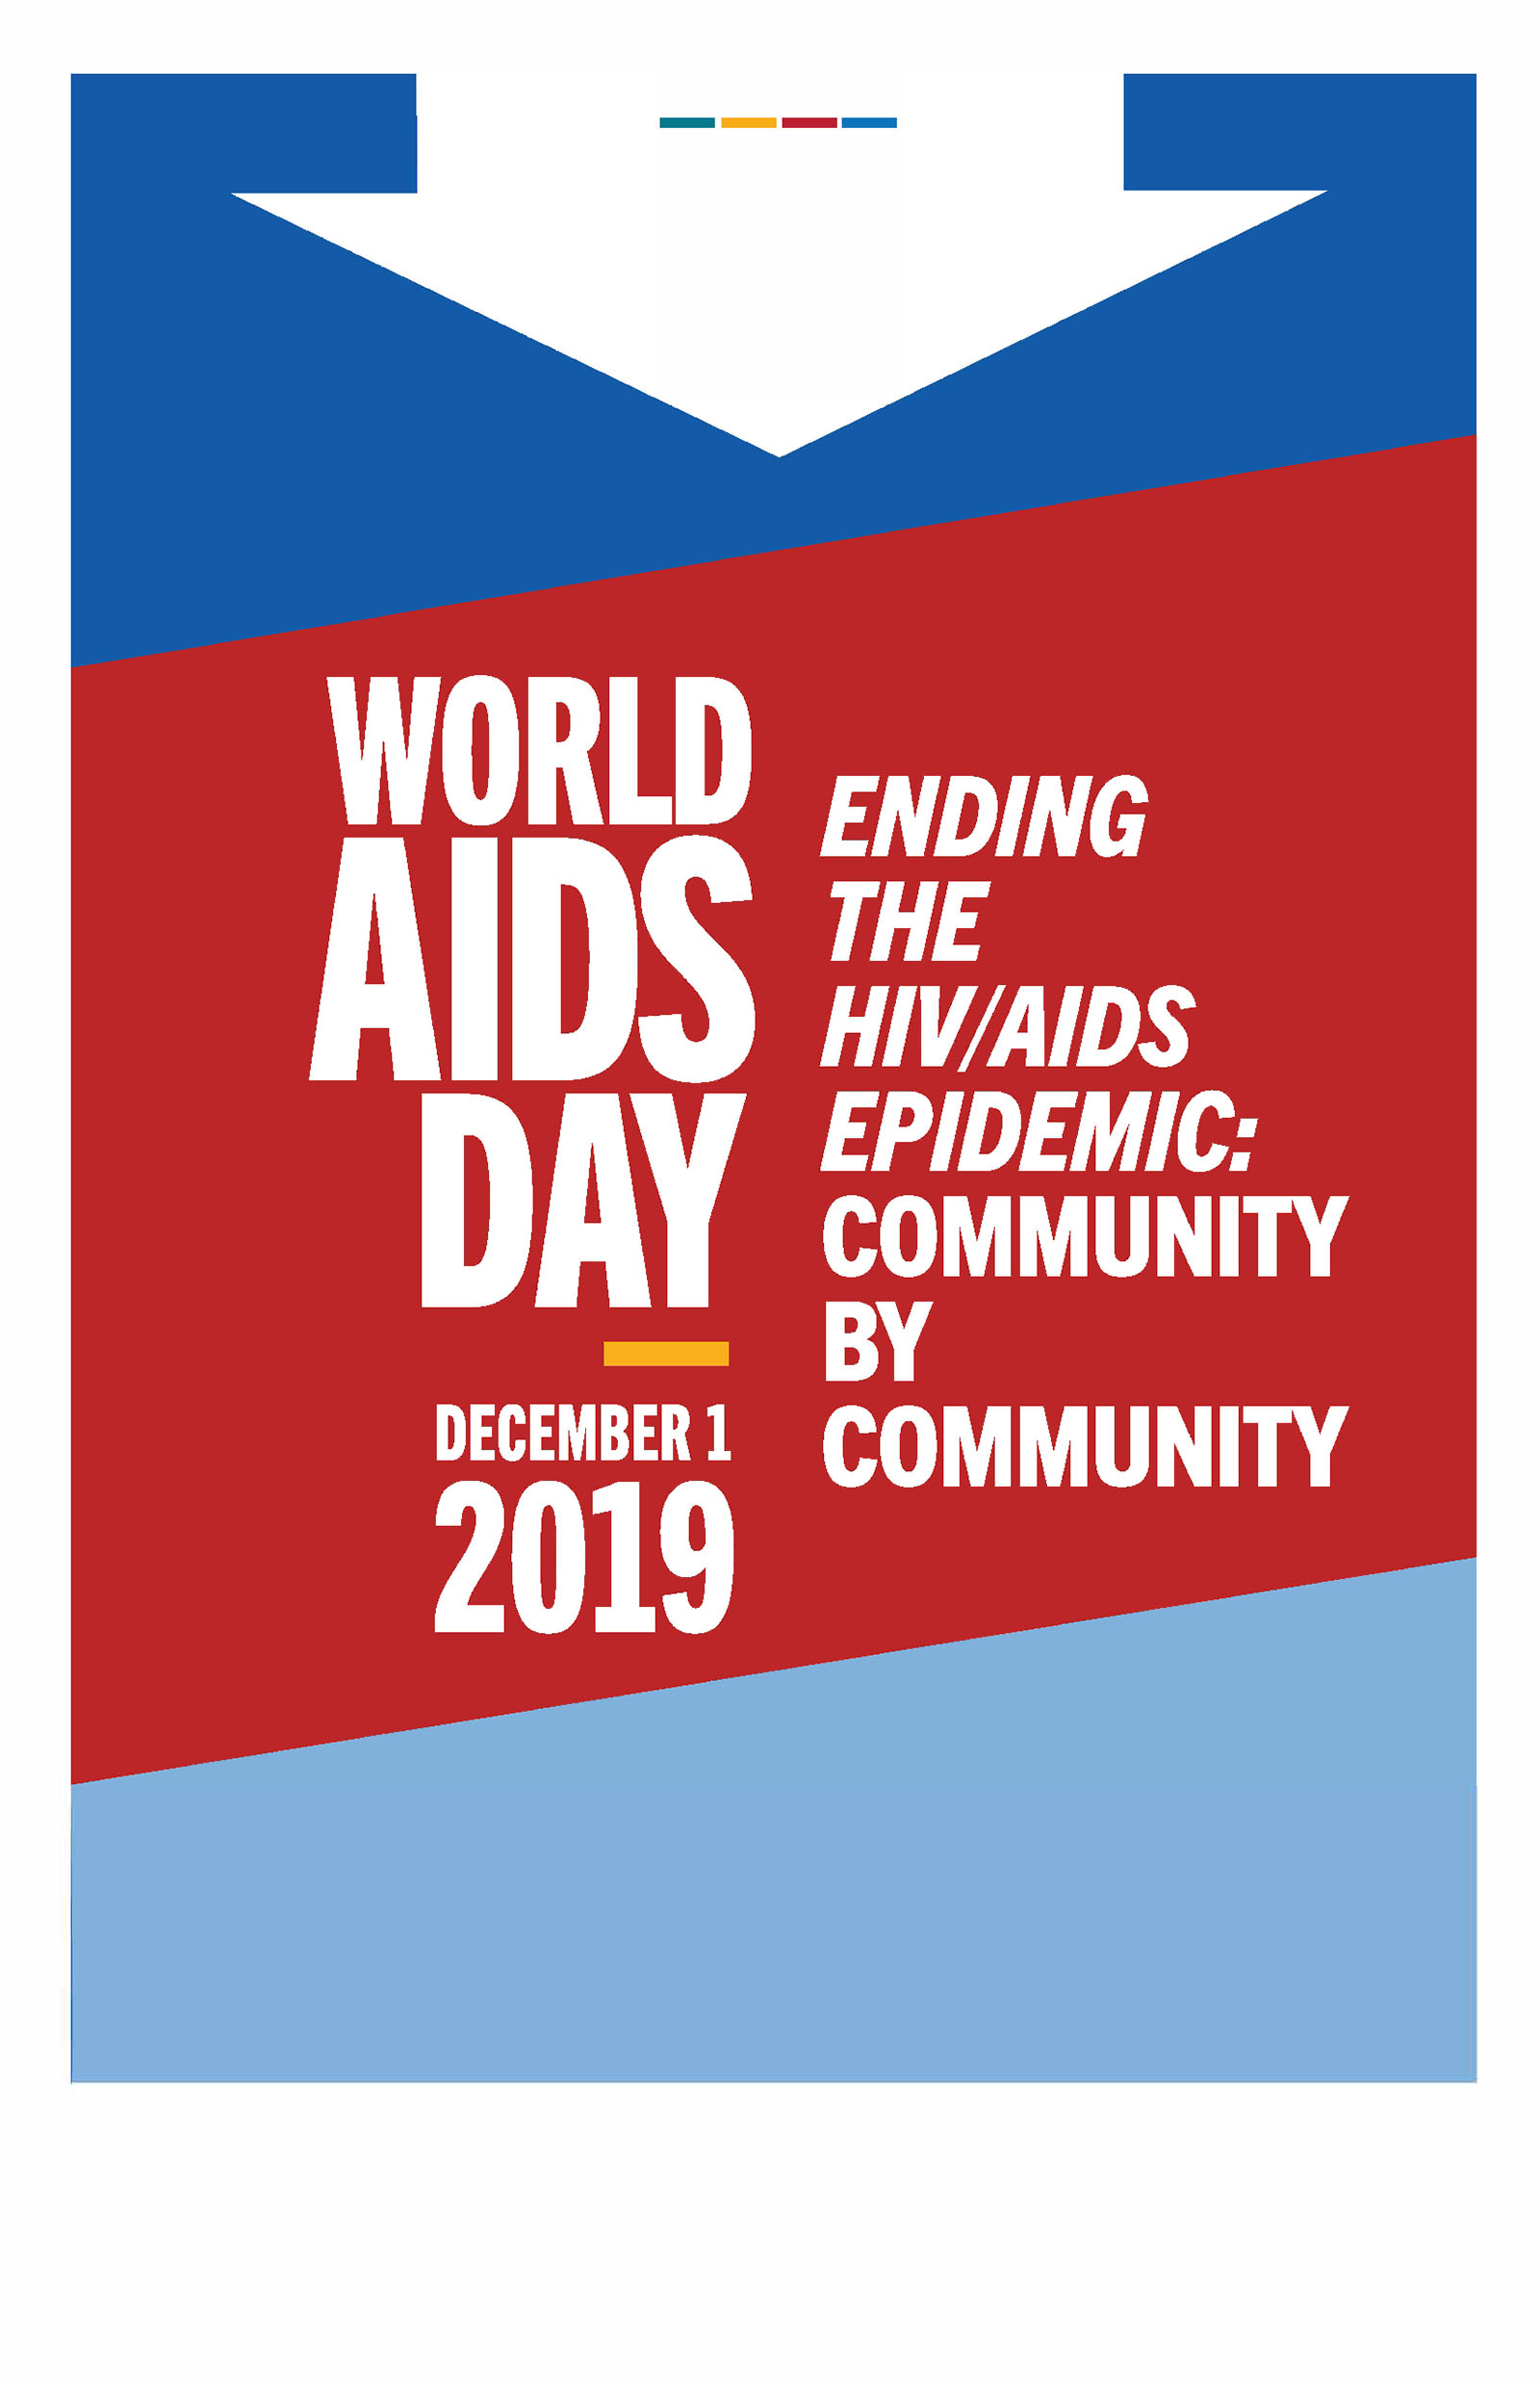 A poster with a large white arrow pointing down to  “World AIDS Day September 1 2019, Ending the HIV/AIDS Epidemic: Community by Community”